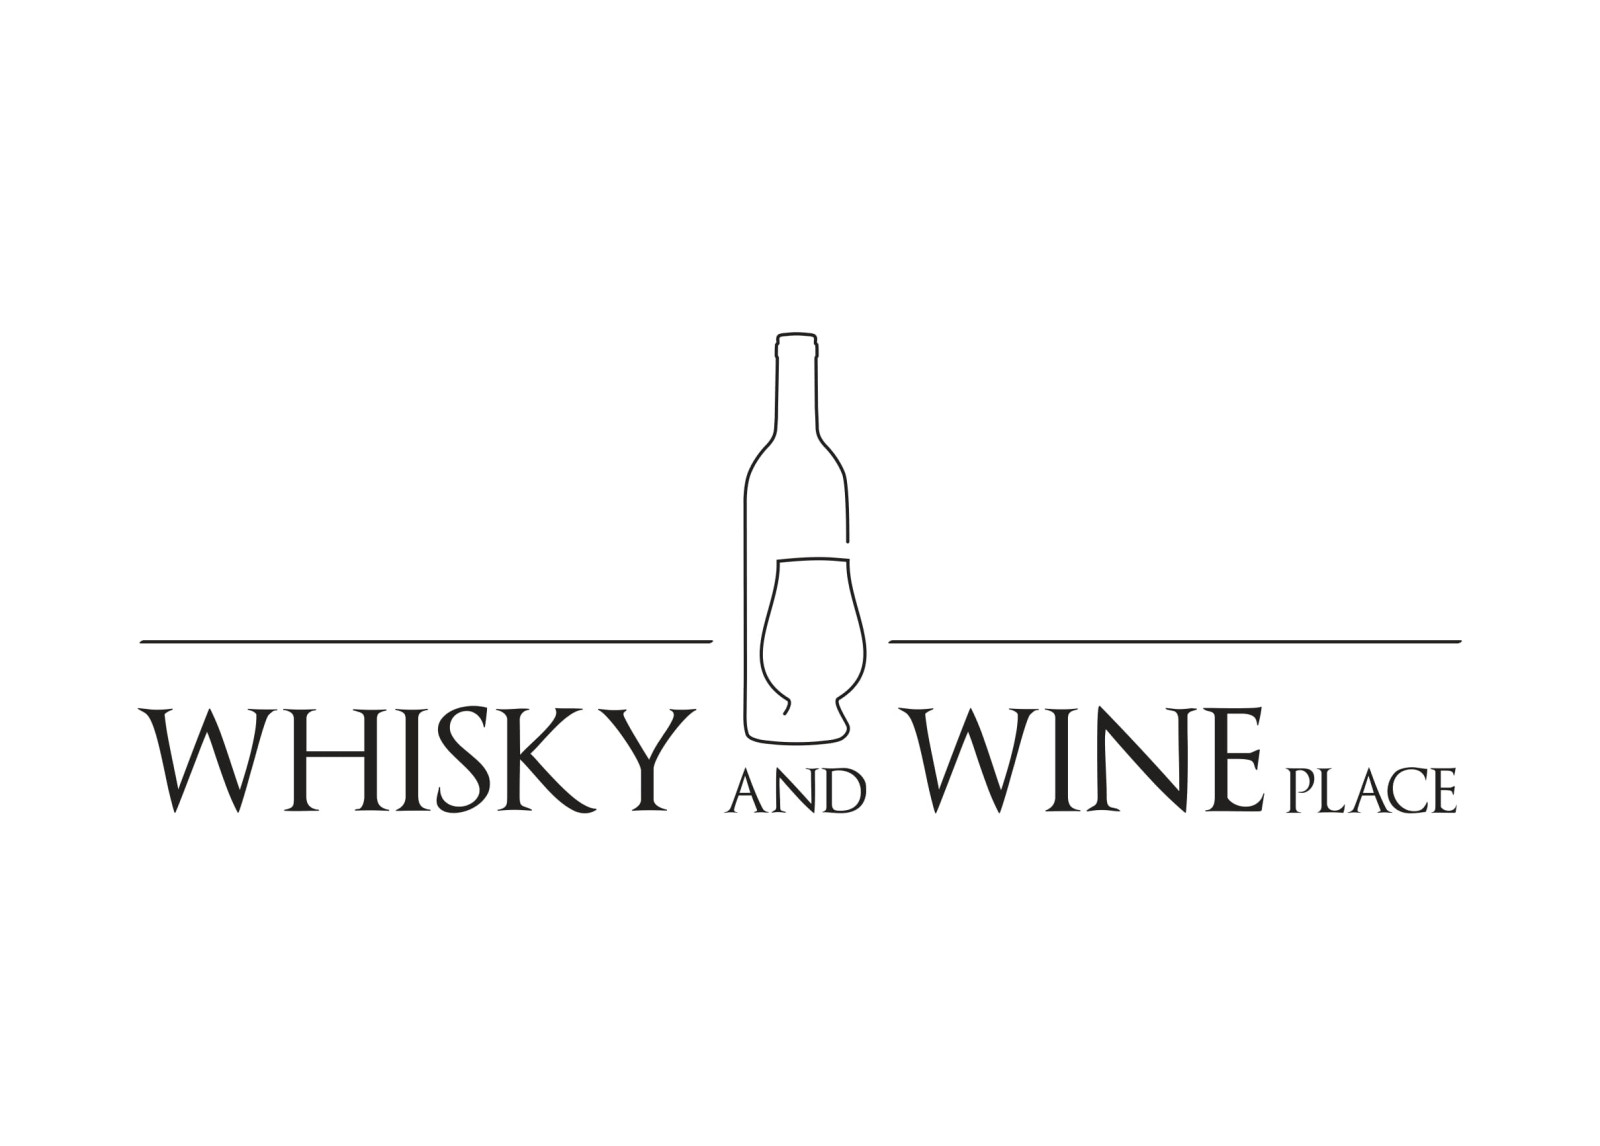 Whisky and Wine Place